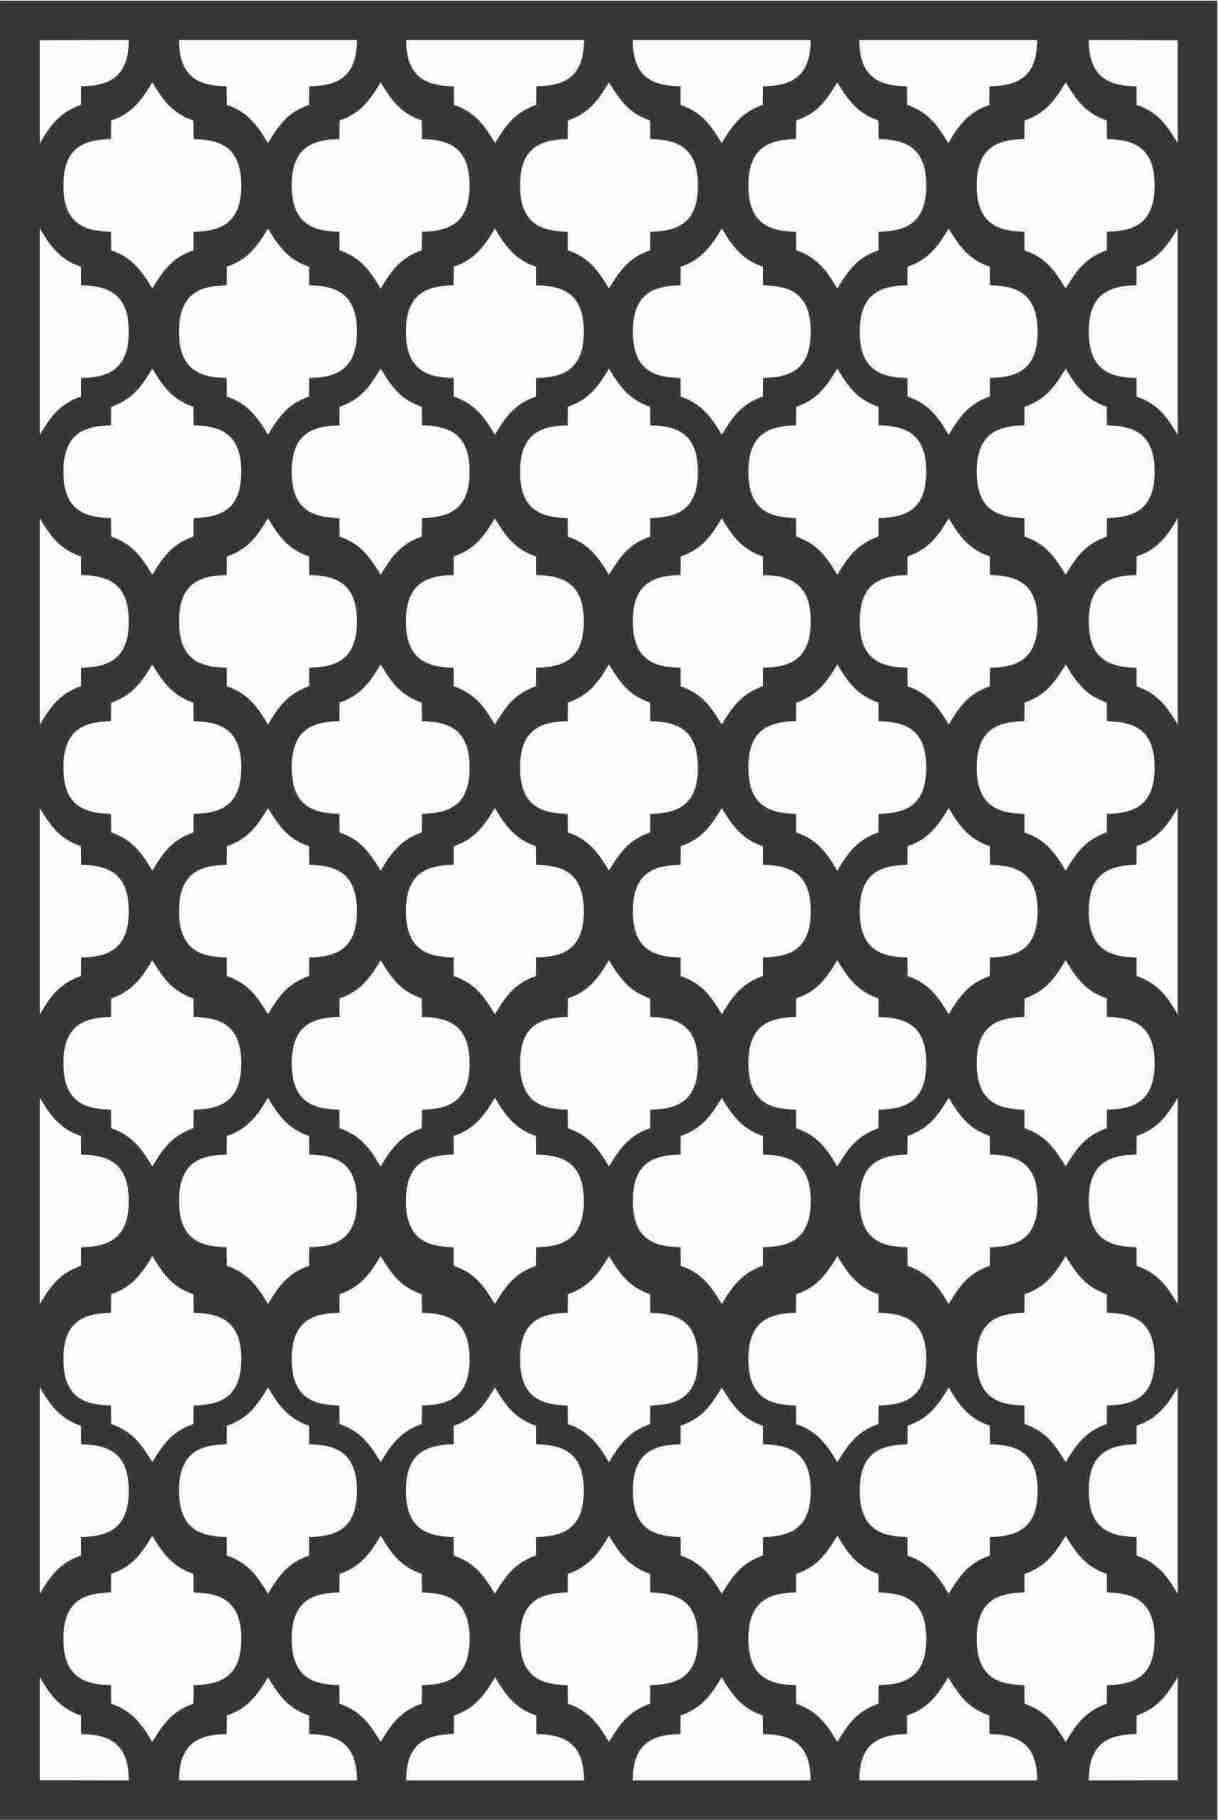 Decorative Screen Patterns For Laser Cutting 166 Free DXF File